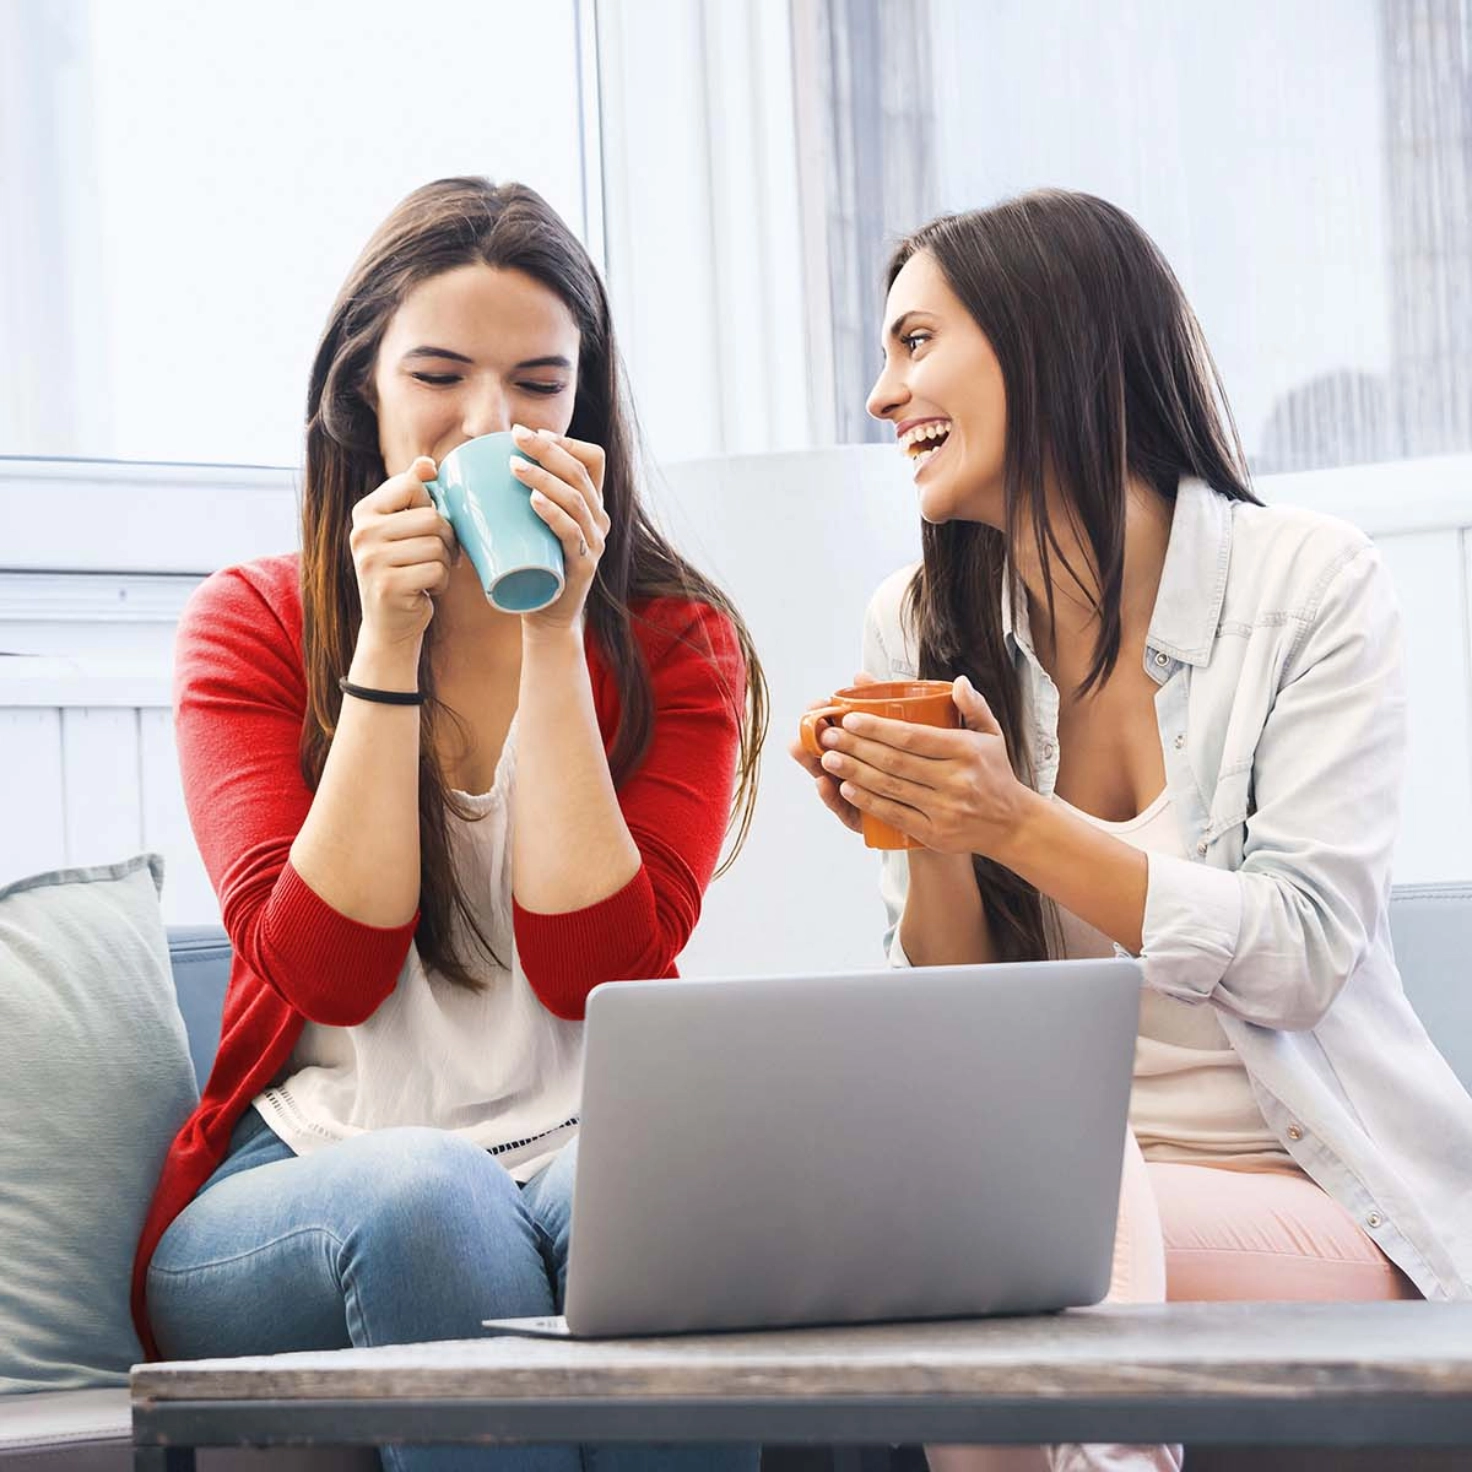 Two women are sitting on the sofa with a cup of coffee and talking. On the table in front of them is an open laptop.